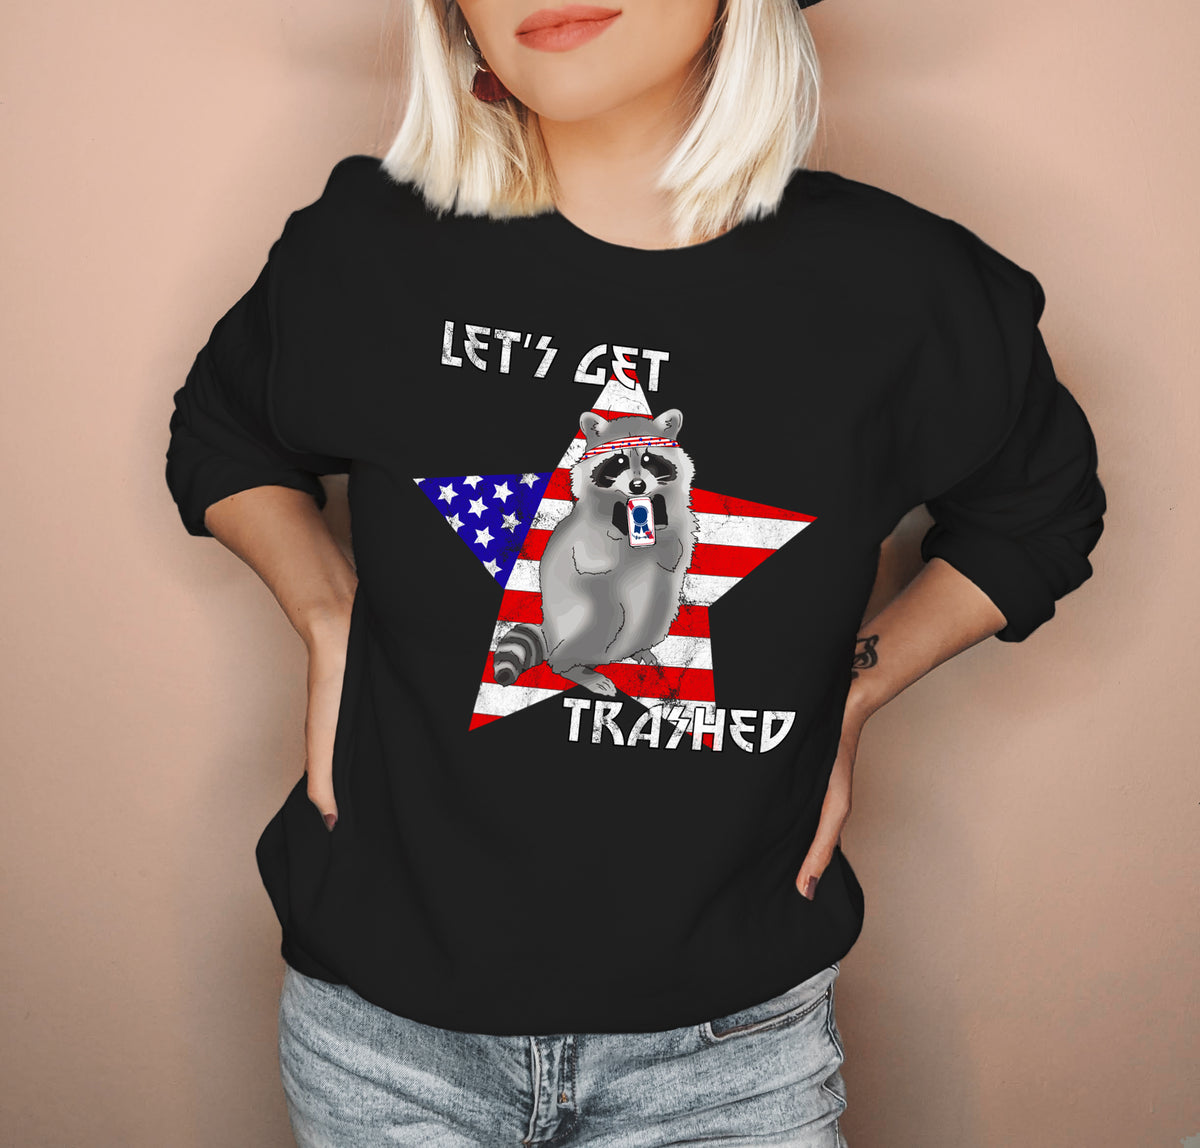 Black sweatshirt with a usa star and a raccoon drinking a beer that says let's get trashed - HighCiti